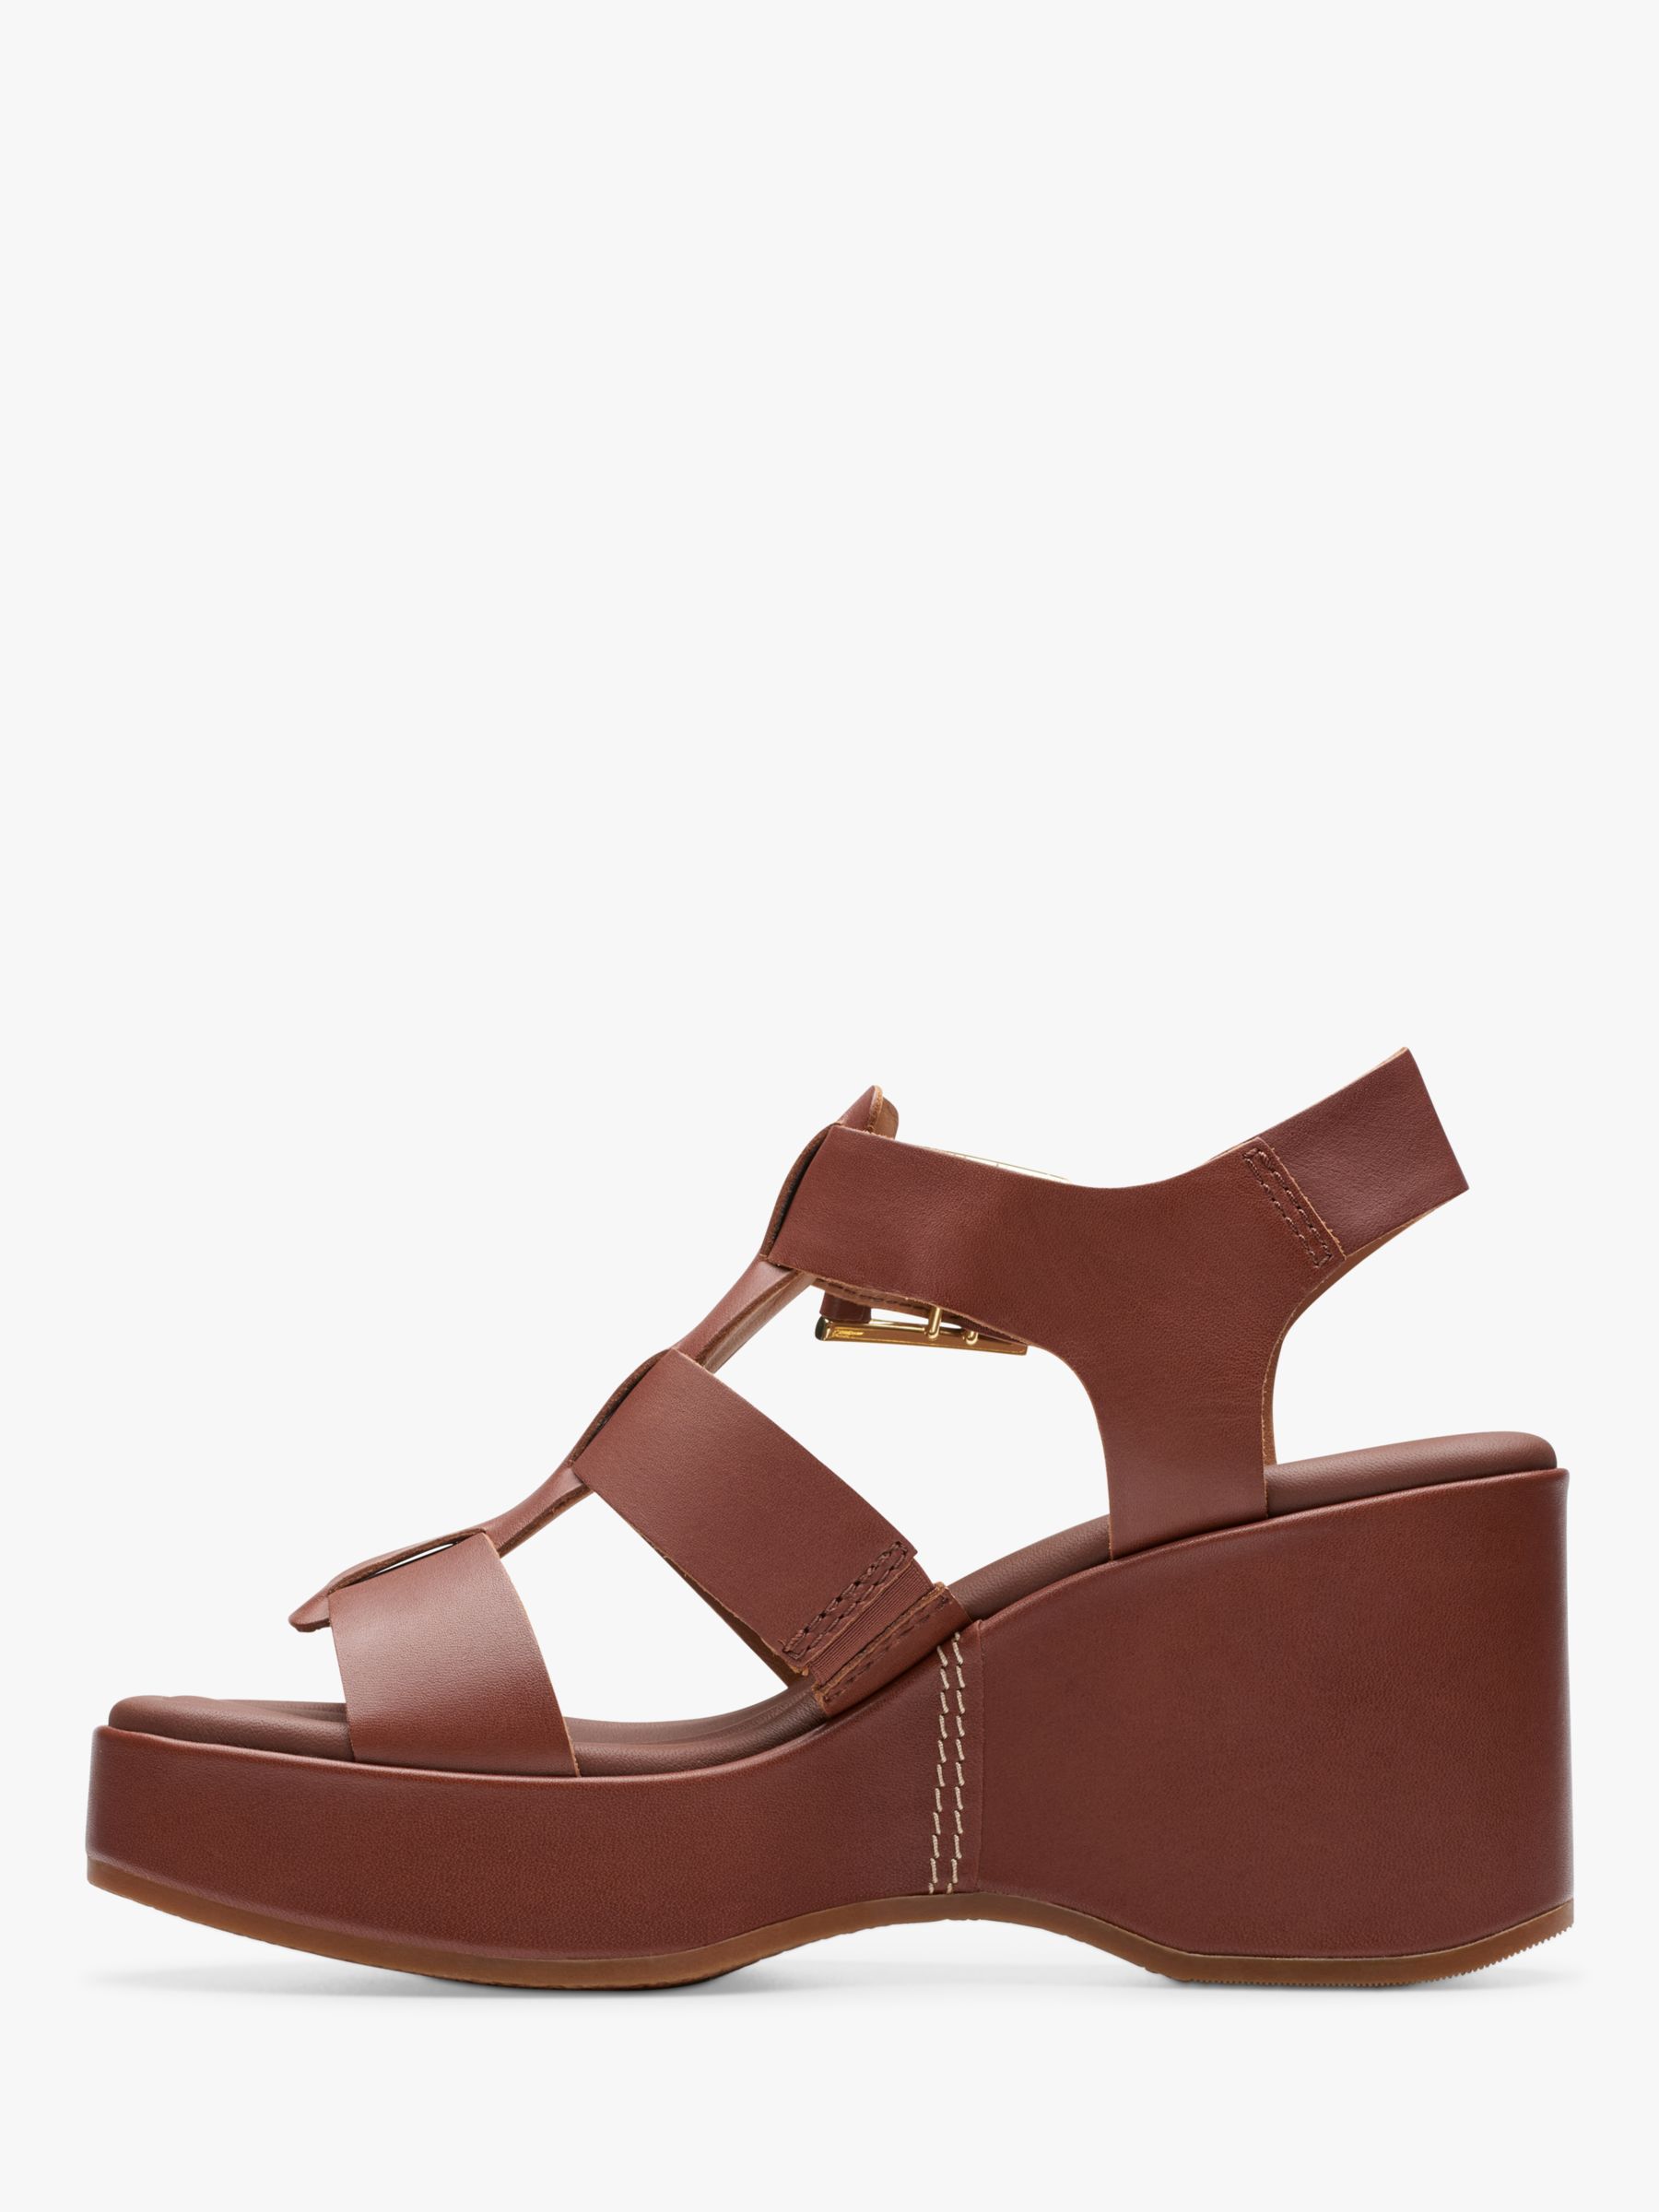 Buy Clarks Manon Cove Leather Wedge Sandals Online at johnlewis.com